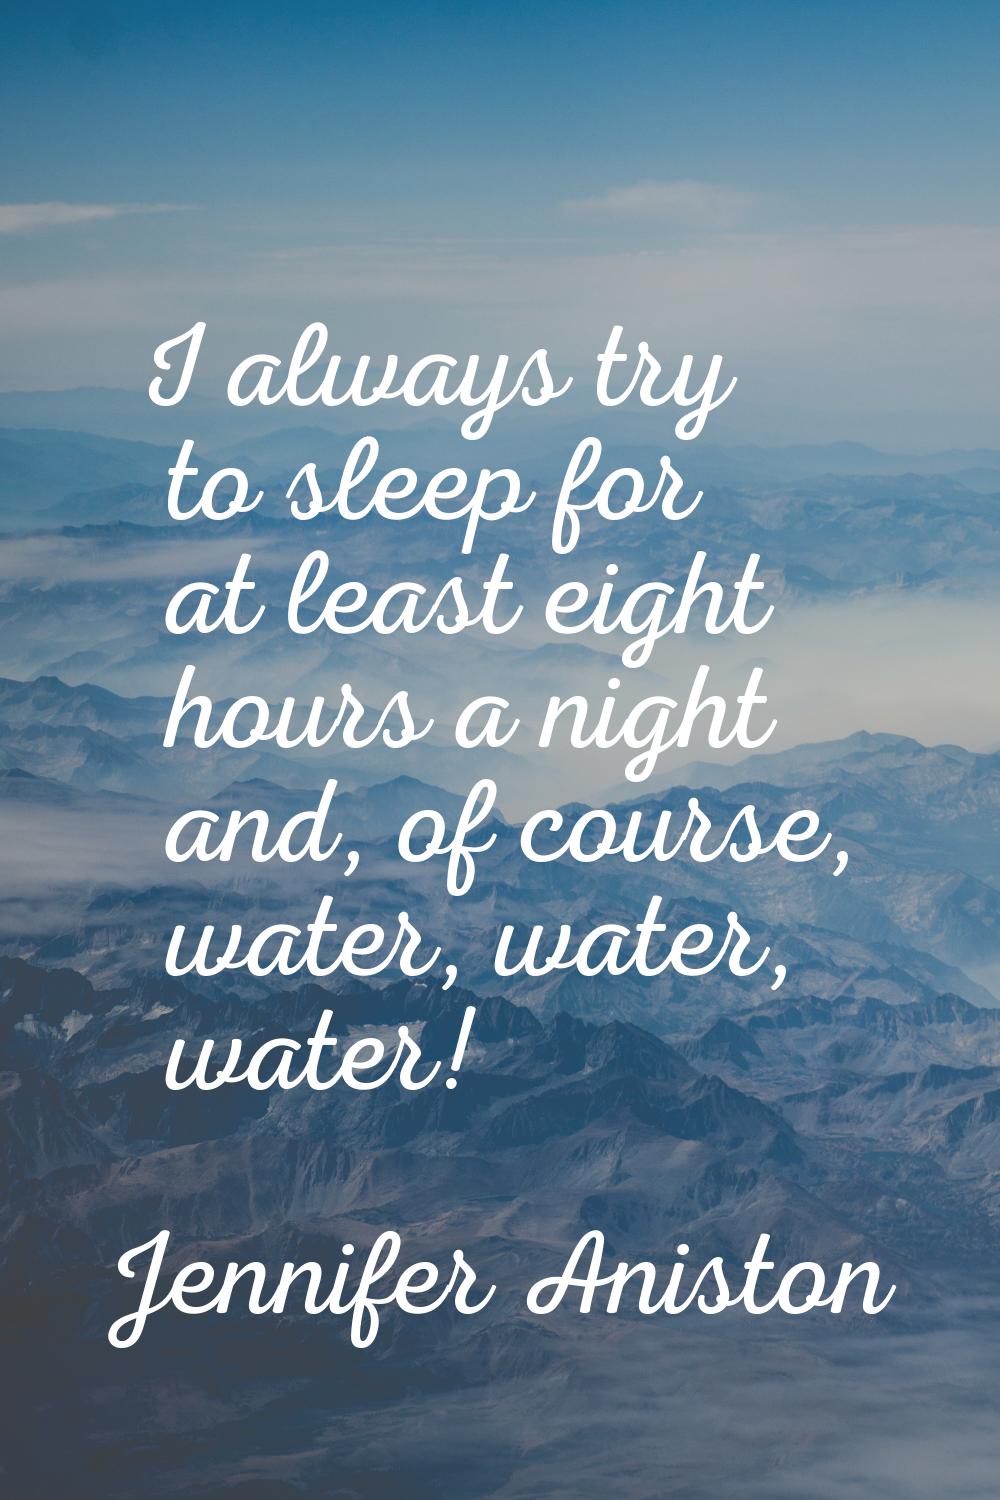 I always try to sleep for at least eight hours a night and, of course, water, water, water!